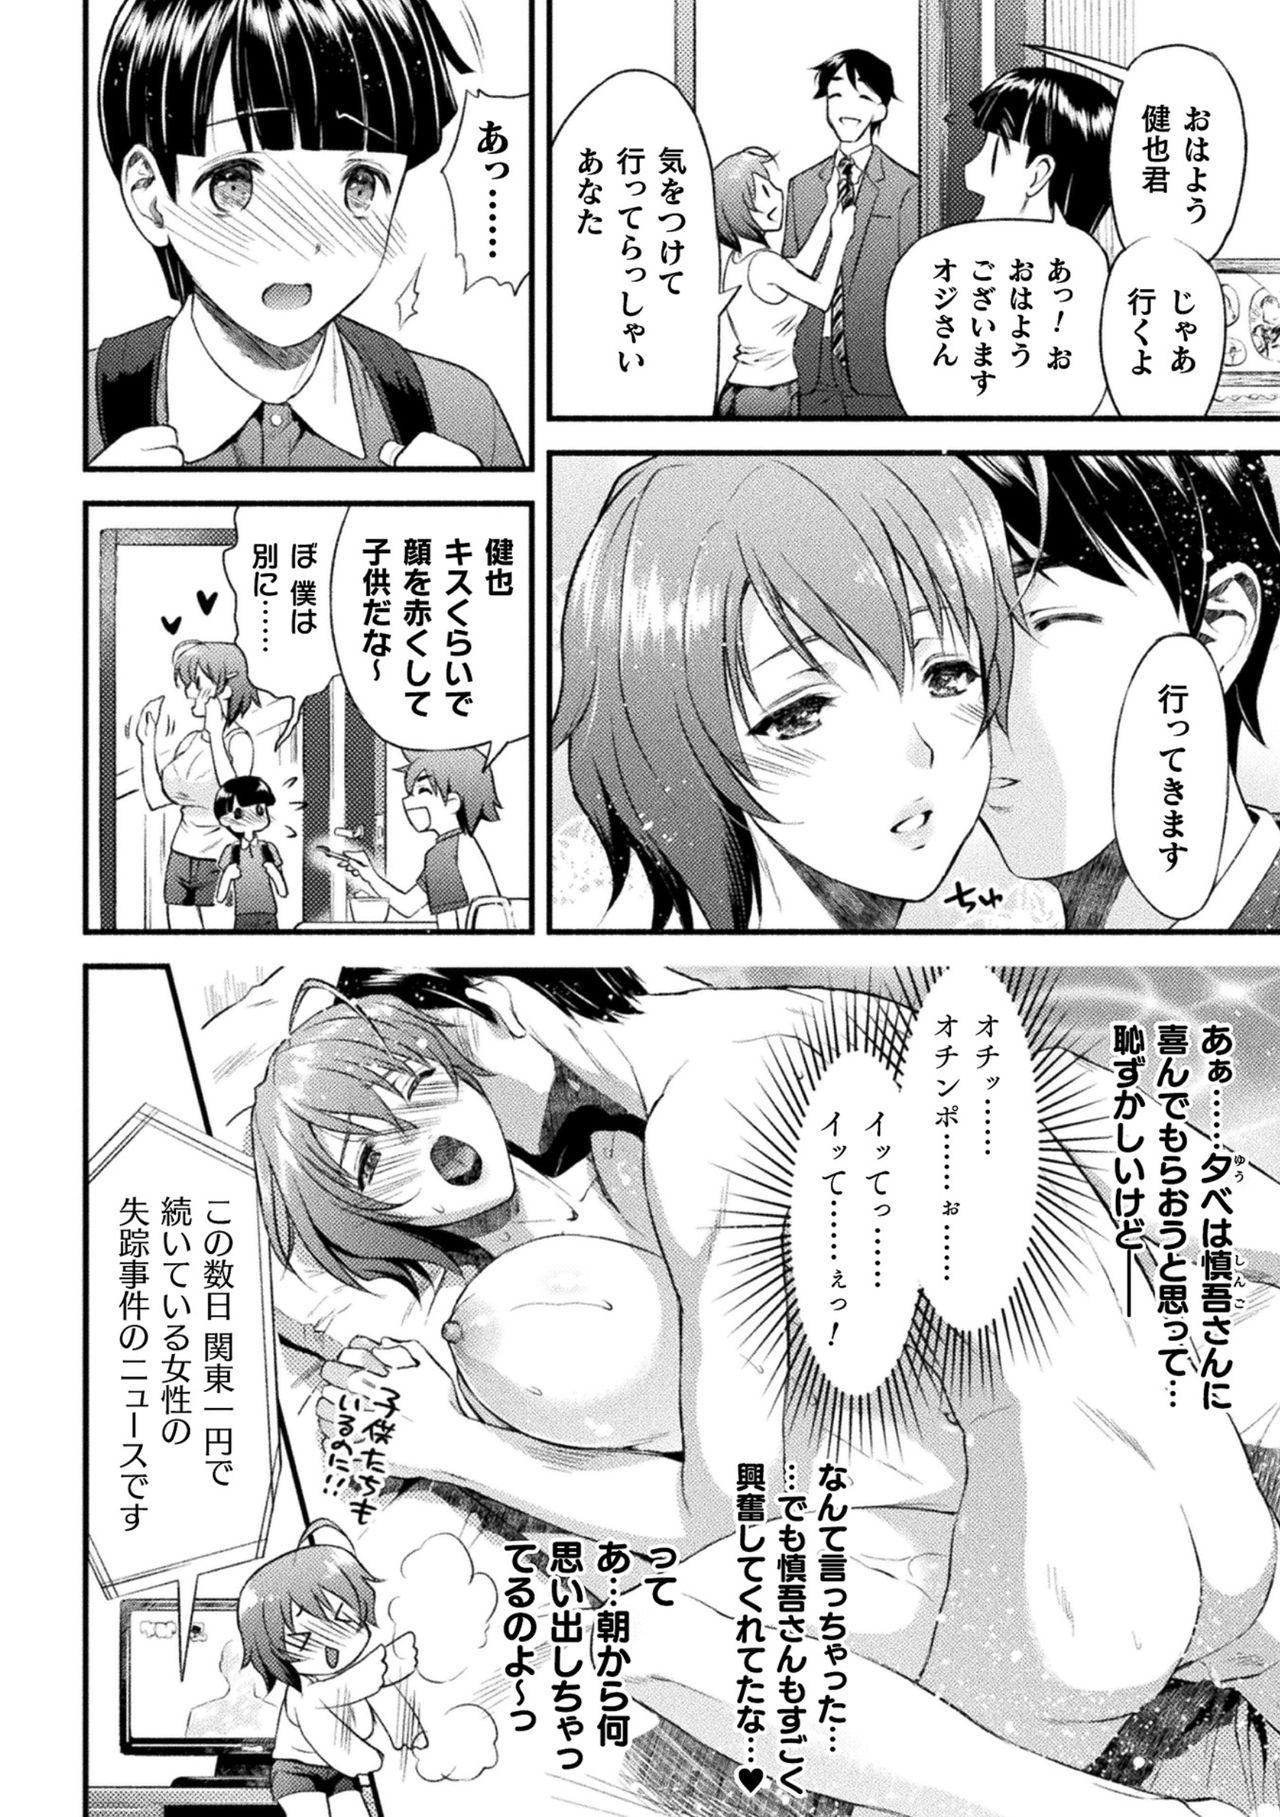 Lover Haiboku Otome Ecstasy Vol. 22 Pussy To Mouth - Page 8